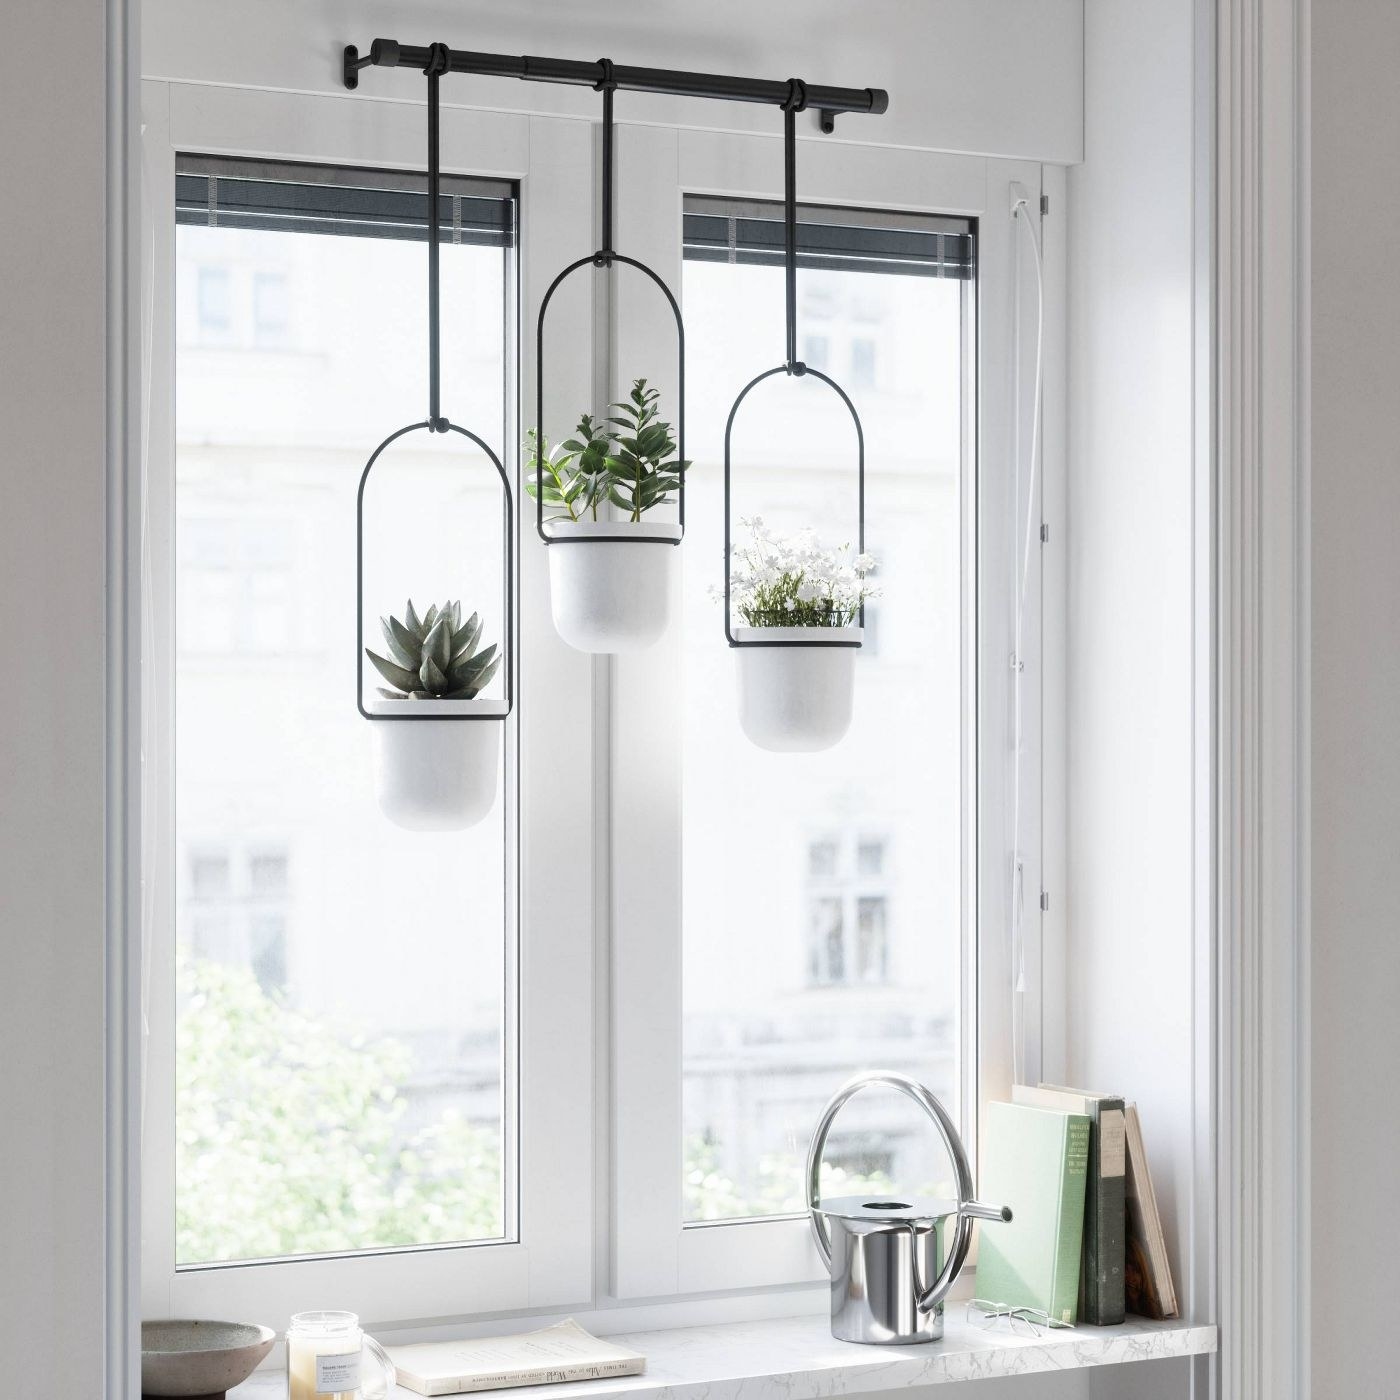 A set of three black and white hanging planters